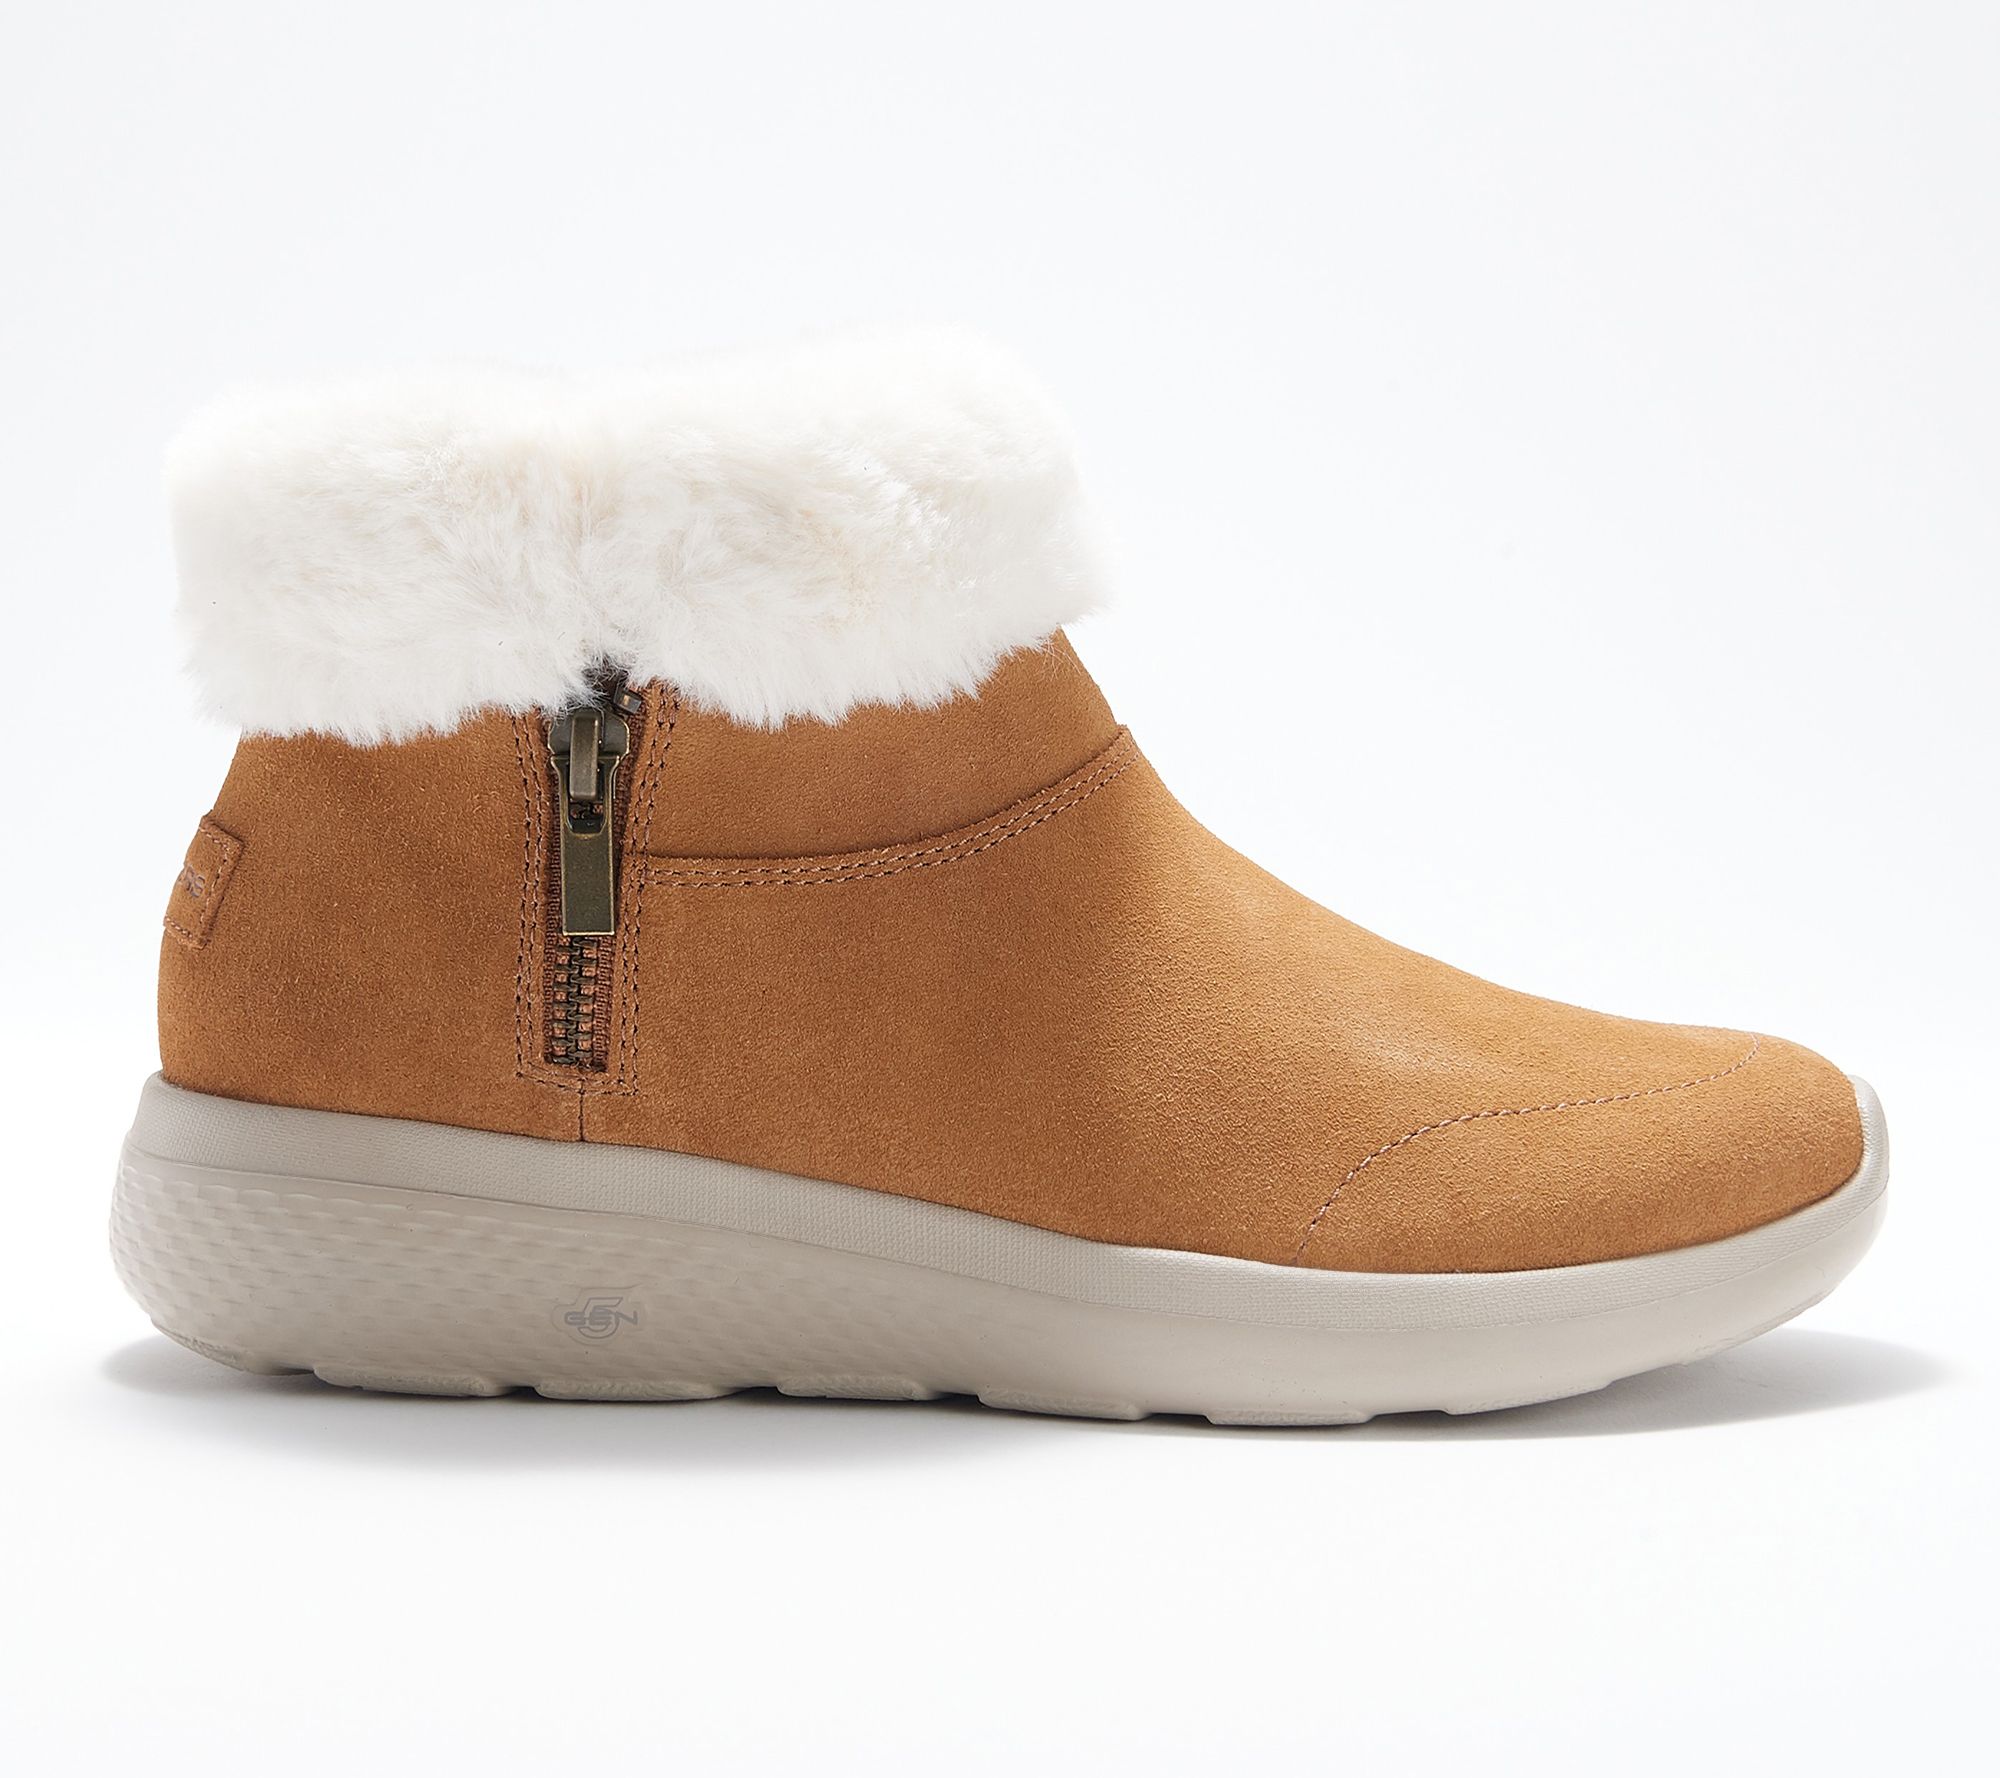 skechers tan suede faux fur lined ankle boots